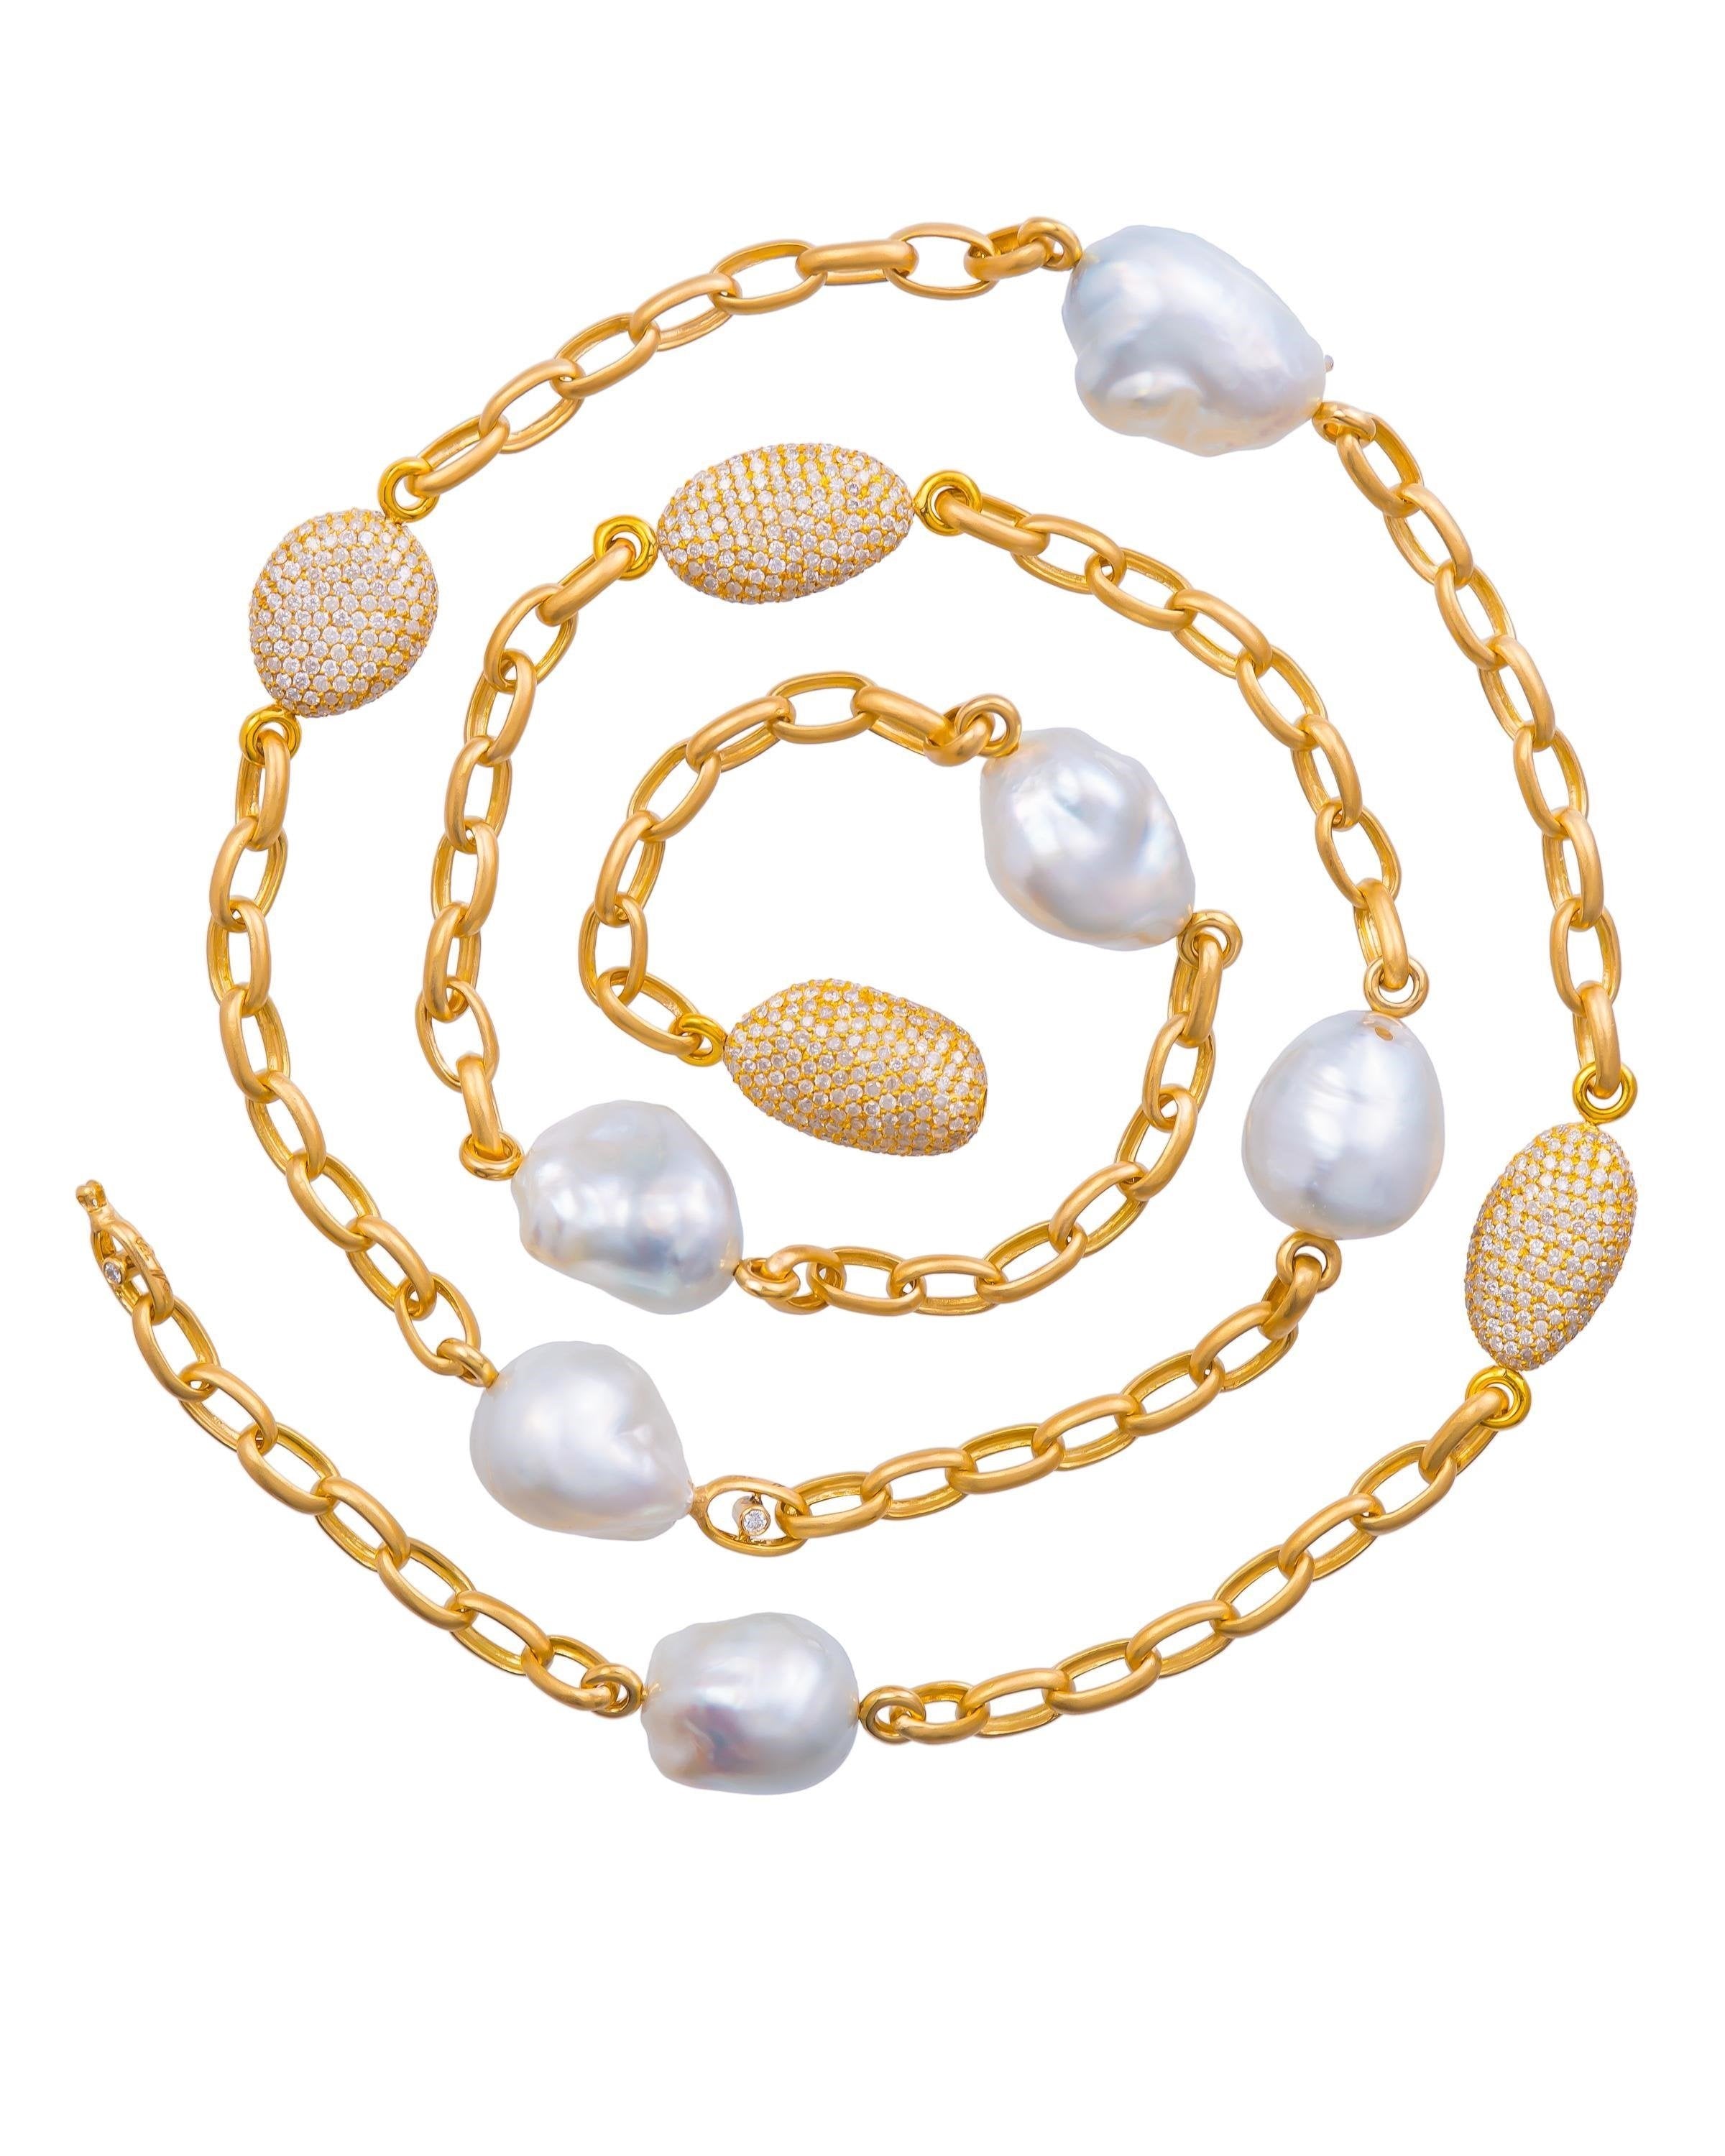 South Sea pearl and diamond necklace featuring Australian baroque pearls and pave diamond beads set diamonds, crafted in 18 karat yellow gold.